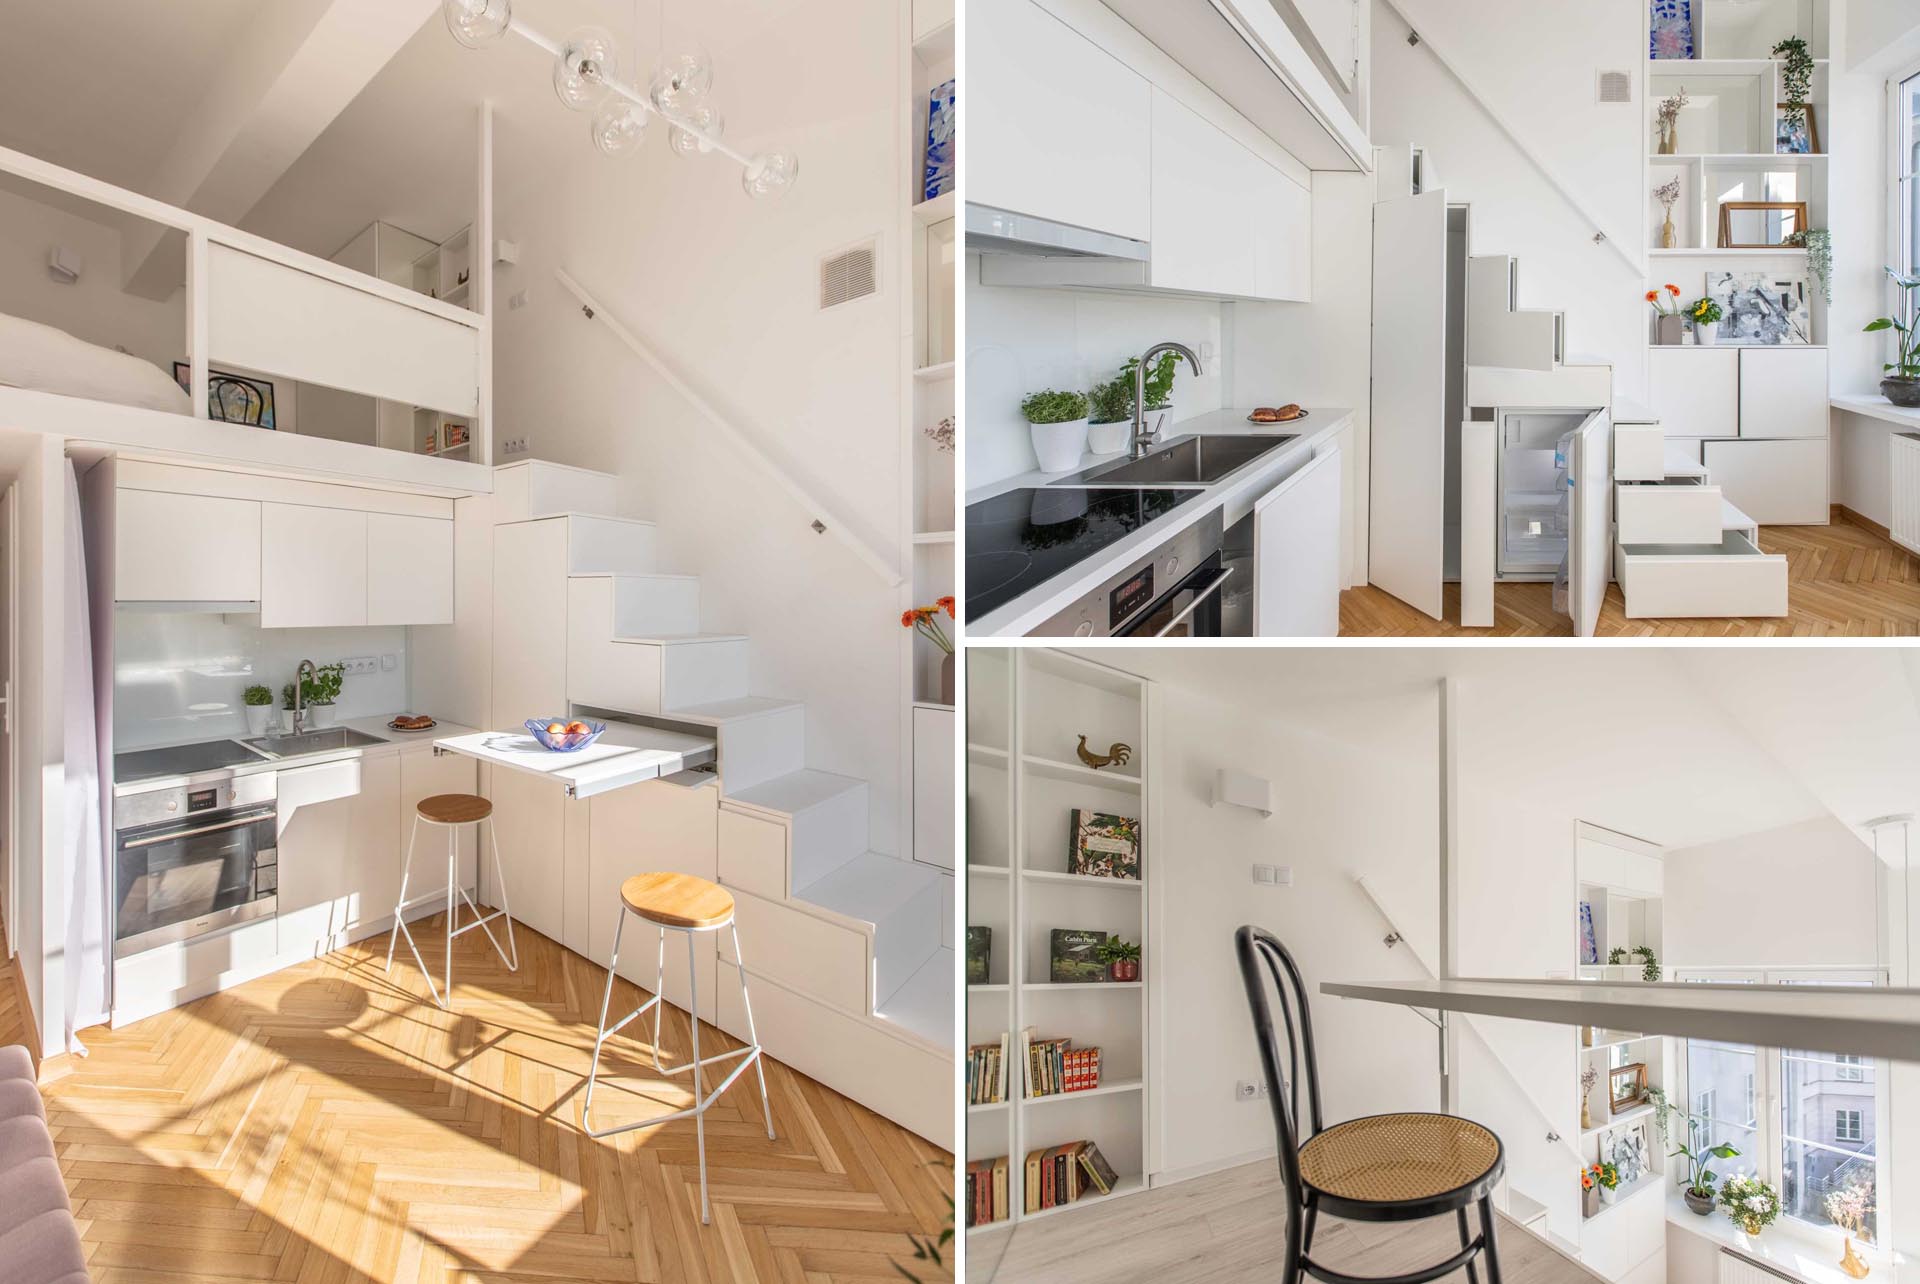 A small apartment with a loft bedroom has clever design solutions.